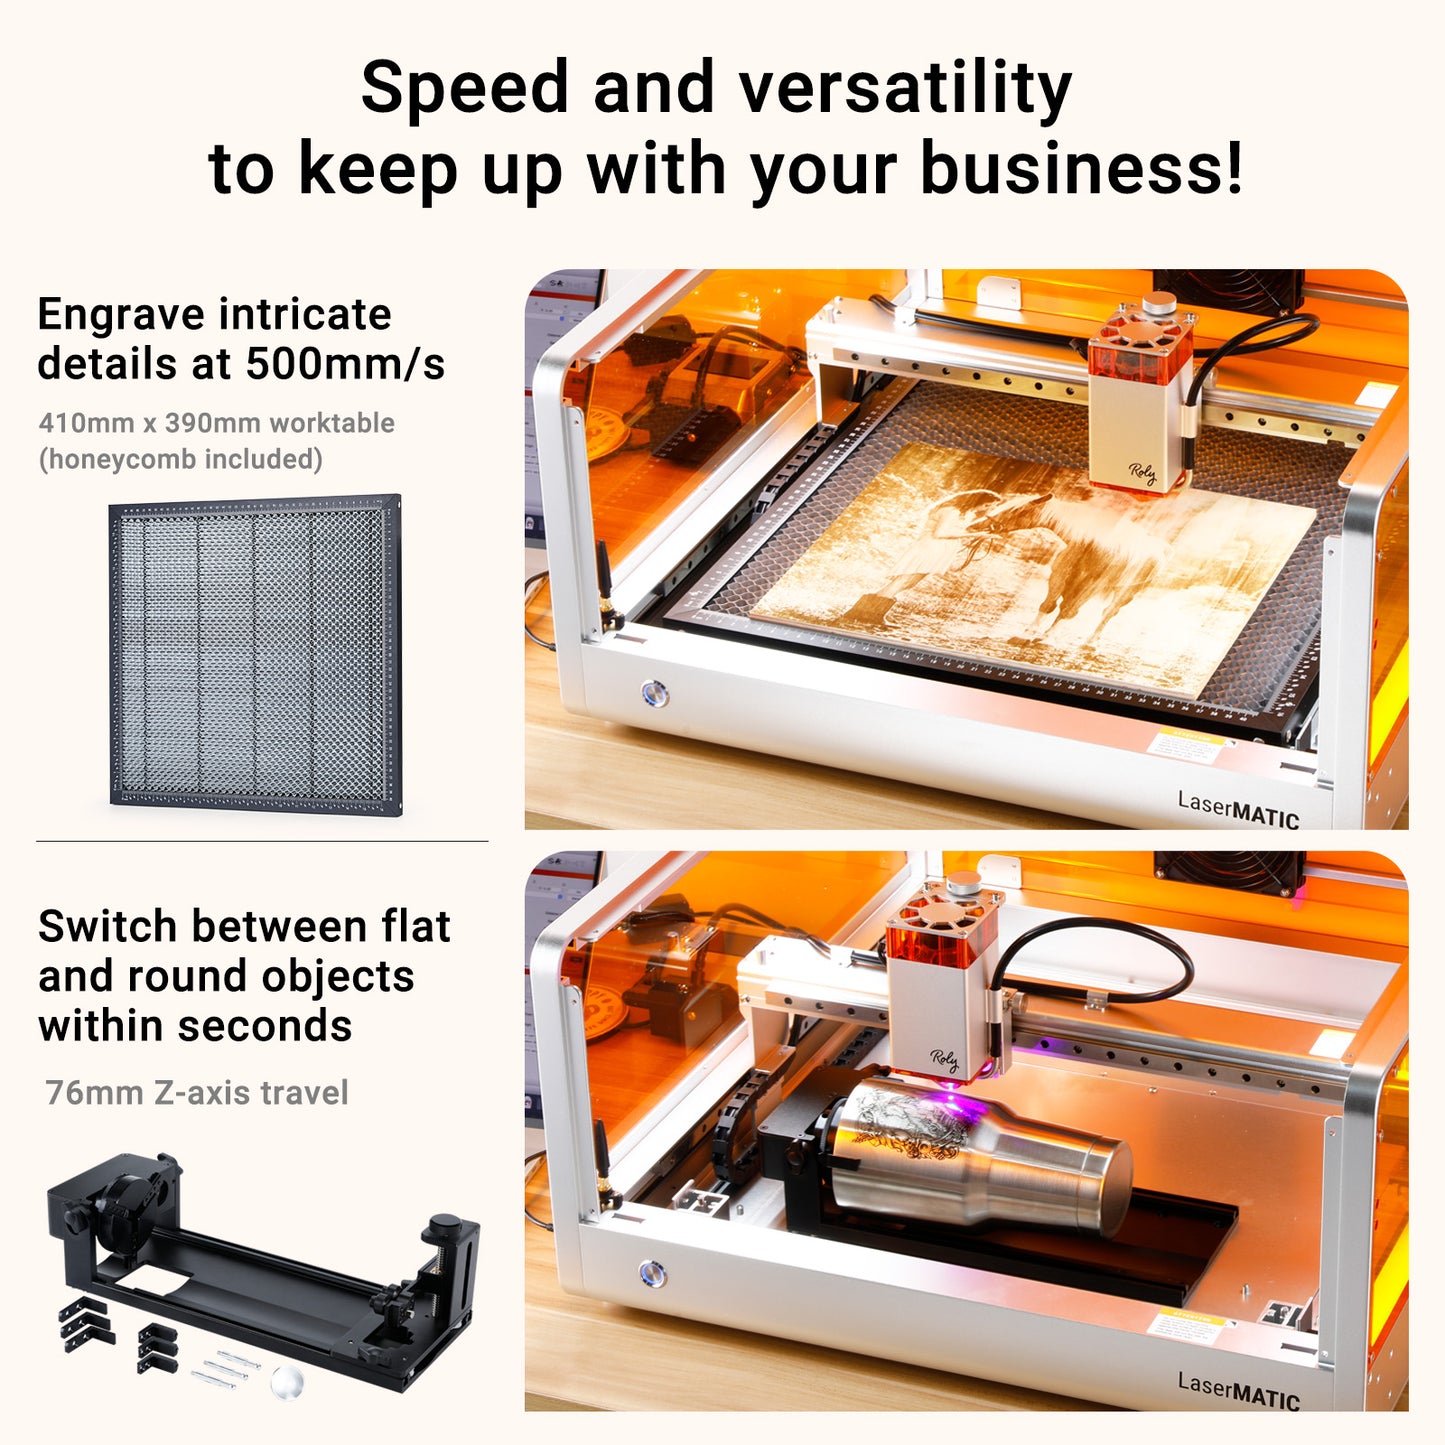 LaserMATIC Mk2, Diode Laser Engraver Available in 10W, 20W and 30W Configurations (For International Customers)